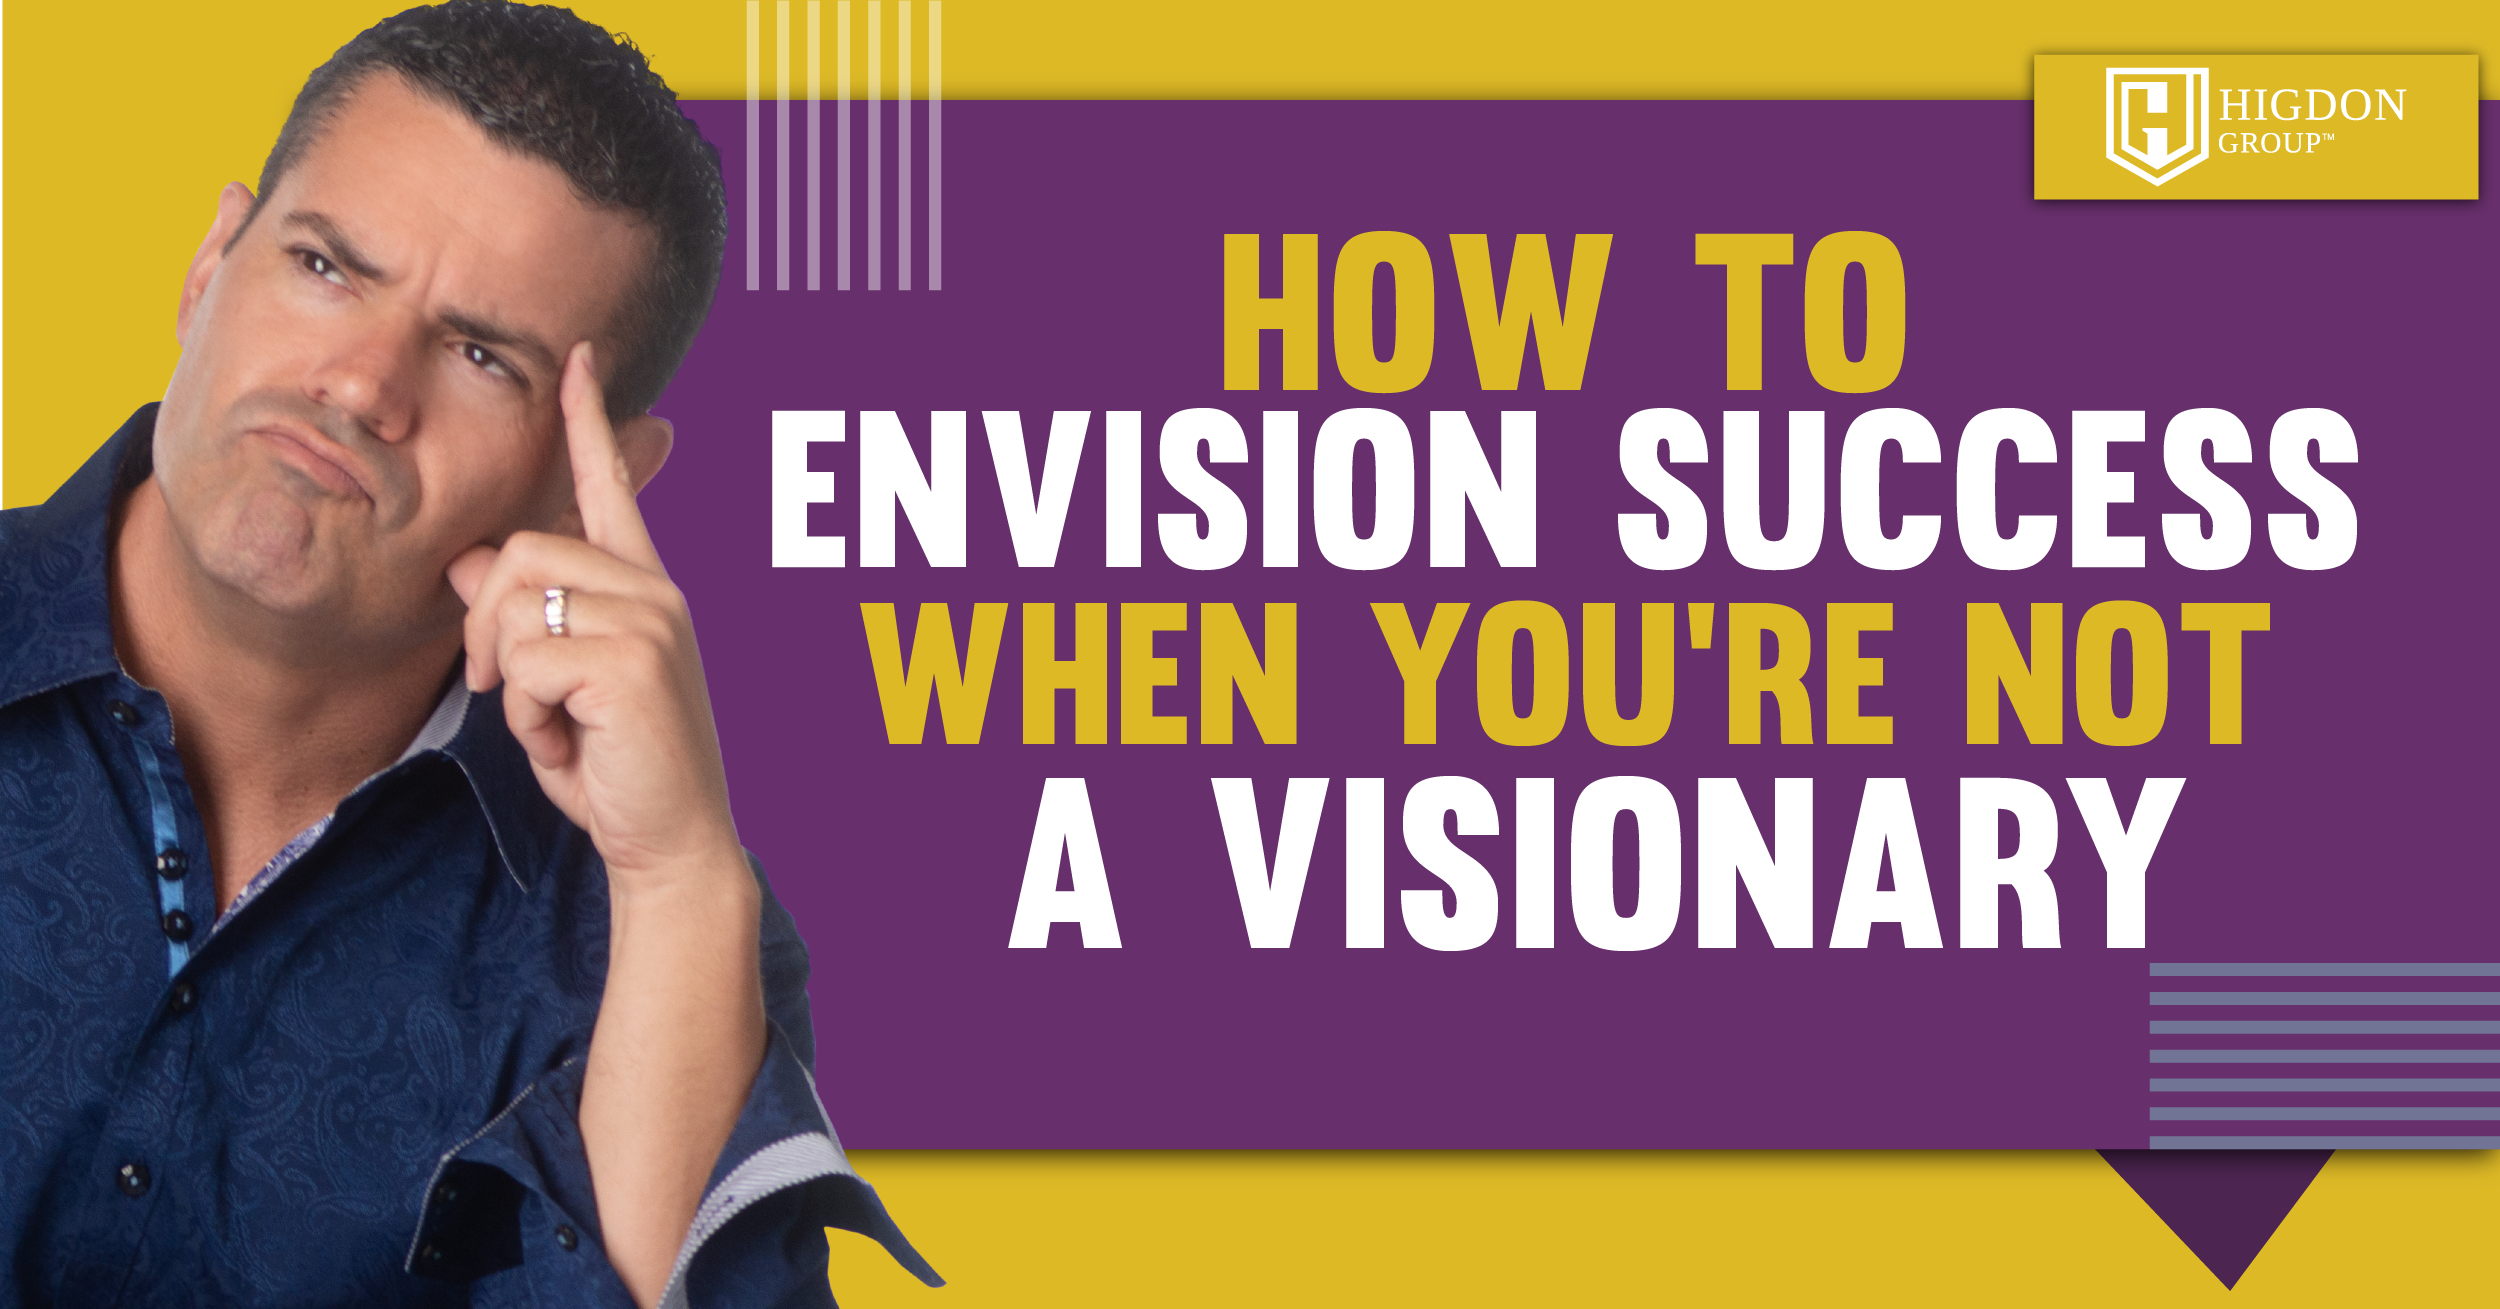 How To Envision Success When You’re Not A Visionary